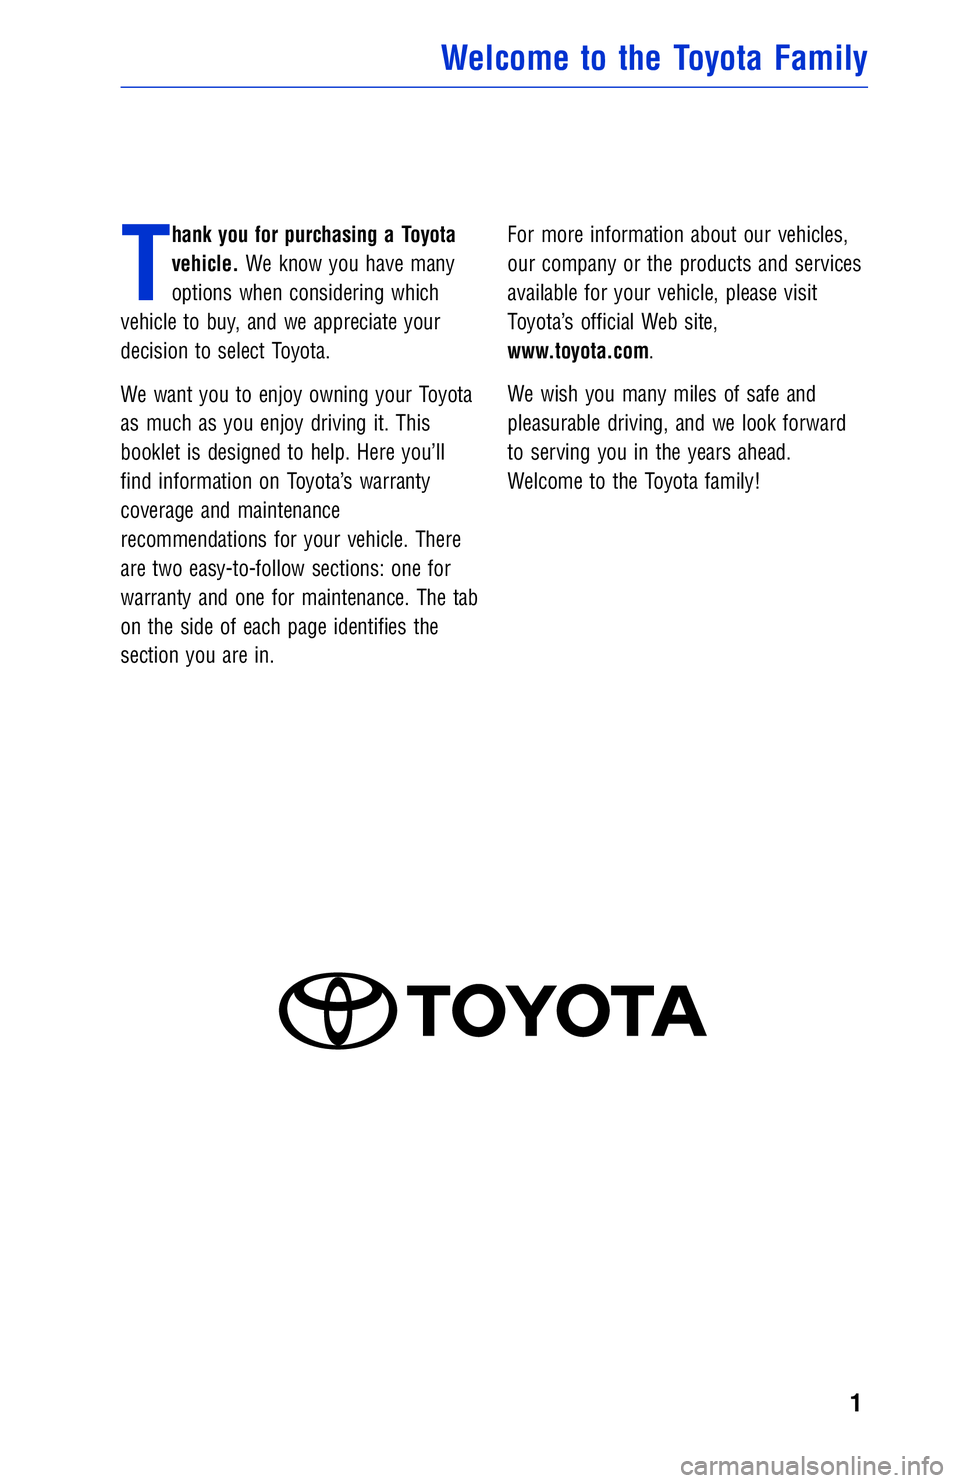 TOYOTA TACOMA 2017  Warranties & Maintenance Guides (in English) JOBNAME: 2372852-en-2017_TACO PAGE: 1 SESS: 3 OUTPUT: Wed Jul 13 07:48:07 2016
/InfoShareAuthorCODA/InfoShareAuthorCODA/TS_Warr_Maint/2372852-en-2017_T\
ACOMA.00505-17WMG-TAC_/TS_Warr_Maint_v1
T
hank 